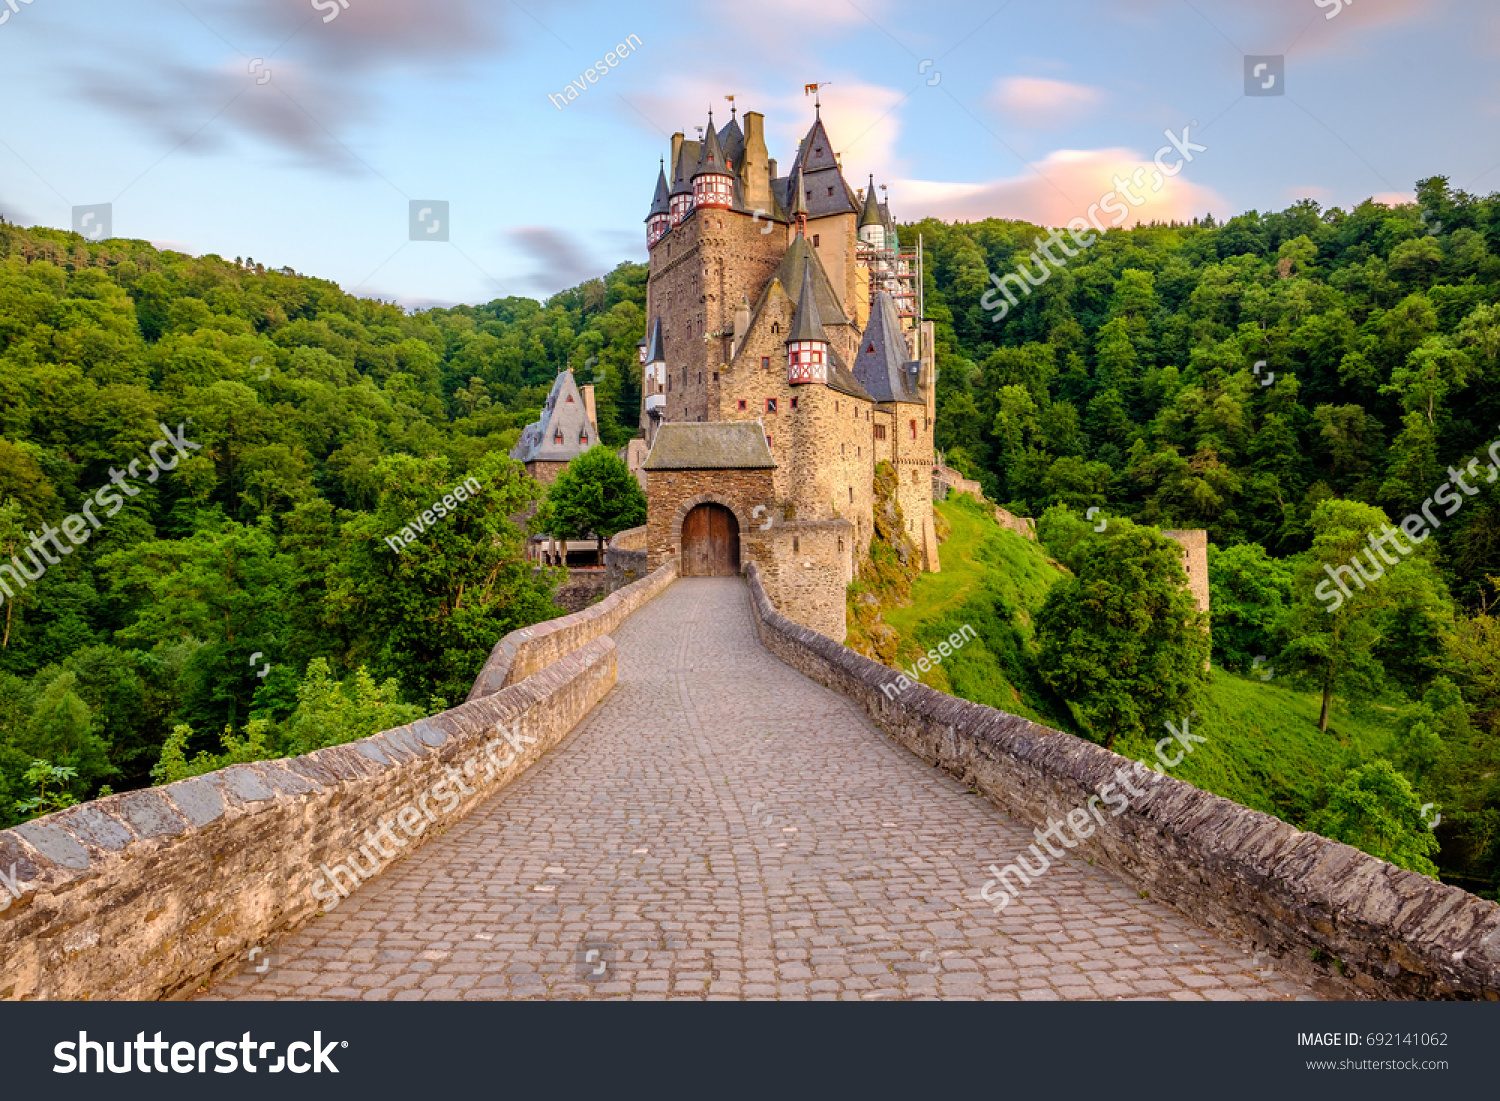 Burg Eltz castle in Rhineland-Palatinate state at sunset, Germany. Construction started	prior to 1157. #692141062